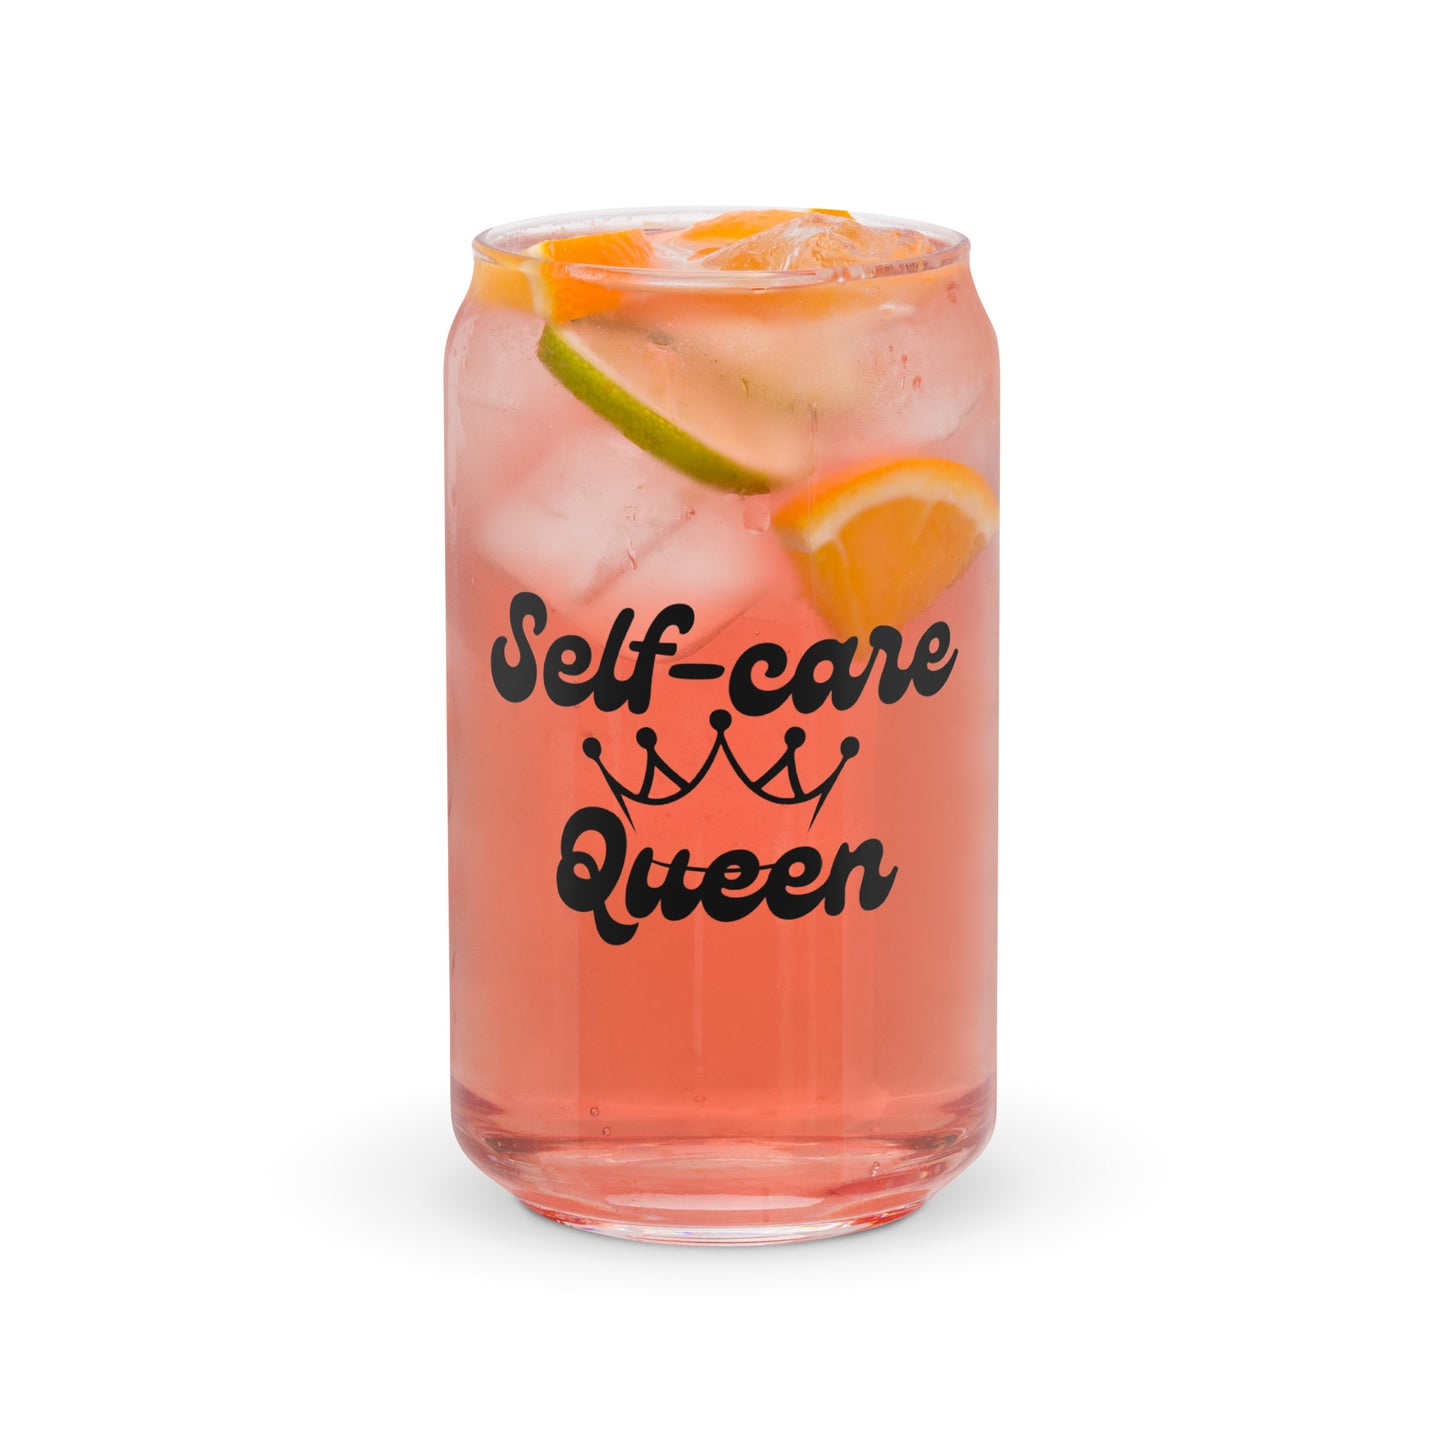 Self-care Queen Can-shaped glass